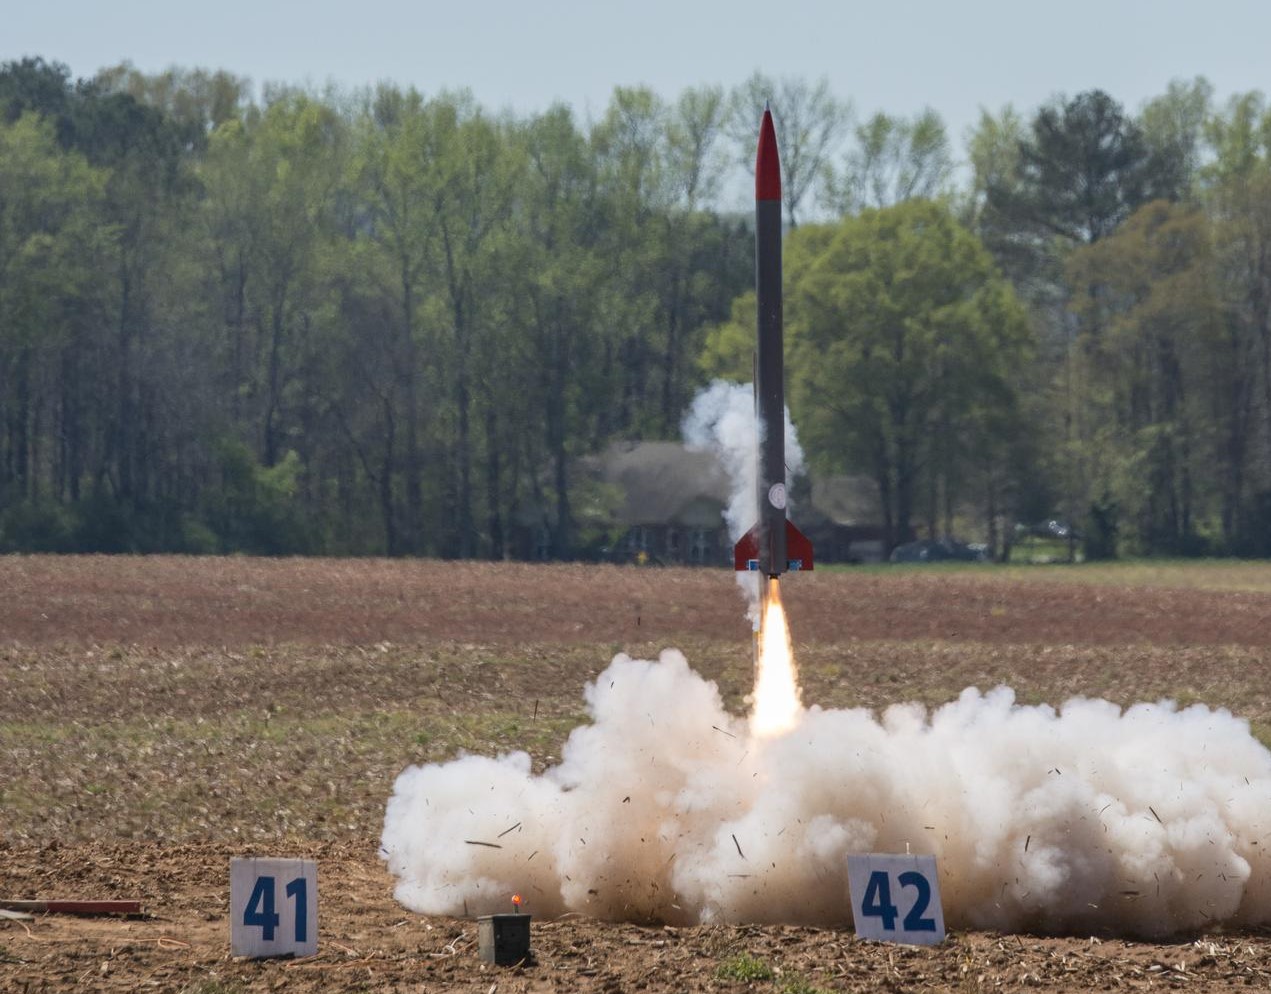 Student Launch teams return to Bragg Farms in Toney, Alabama, for in-person competition Saturday, April 23. 